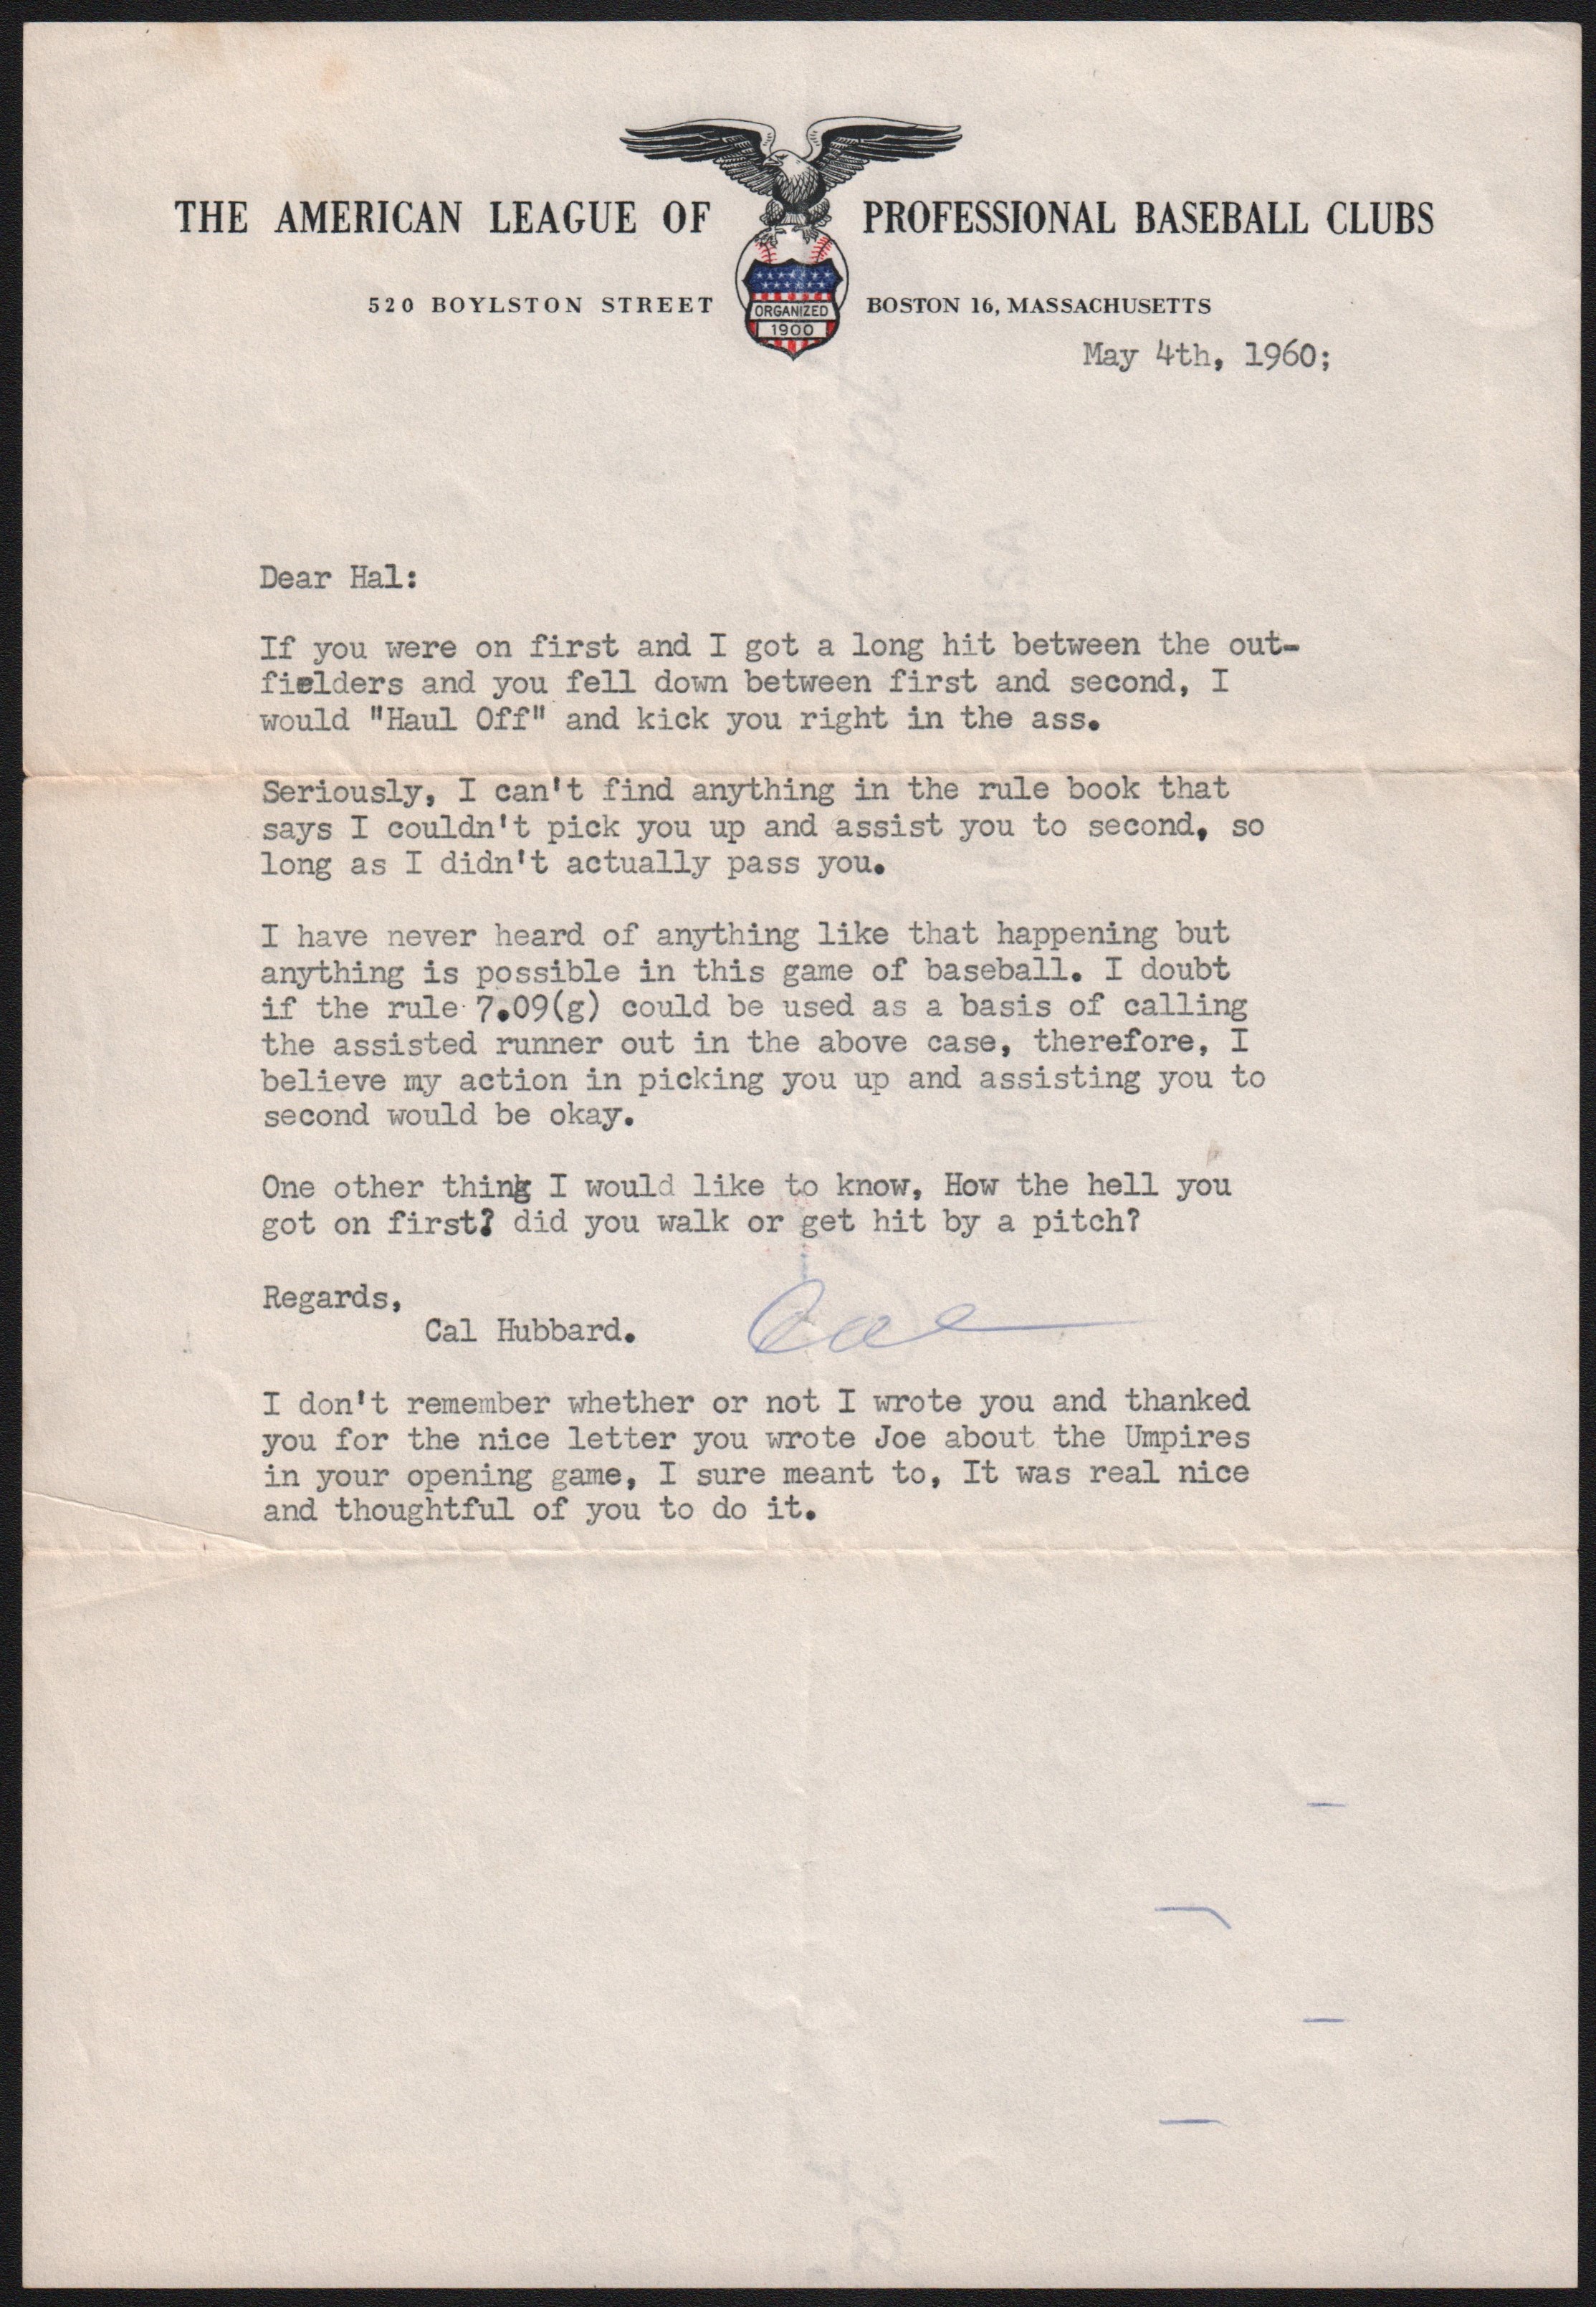 Cal Hubbard "Kick in the Ass" Letter